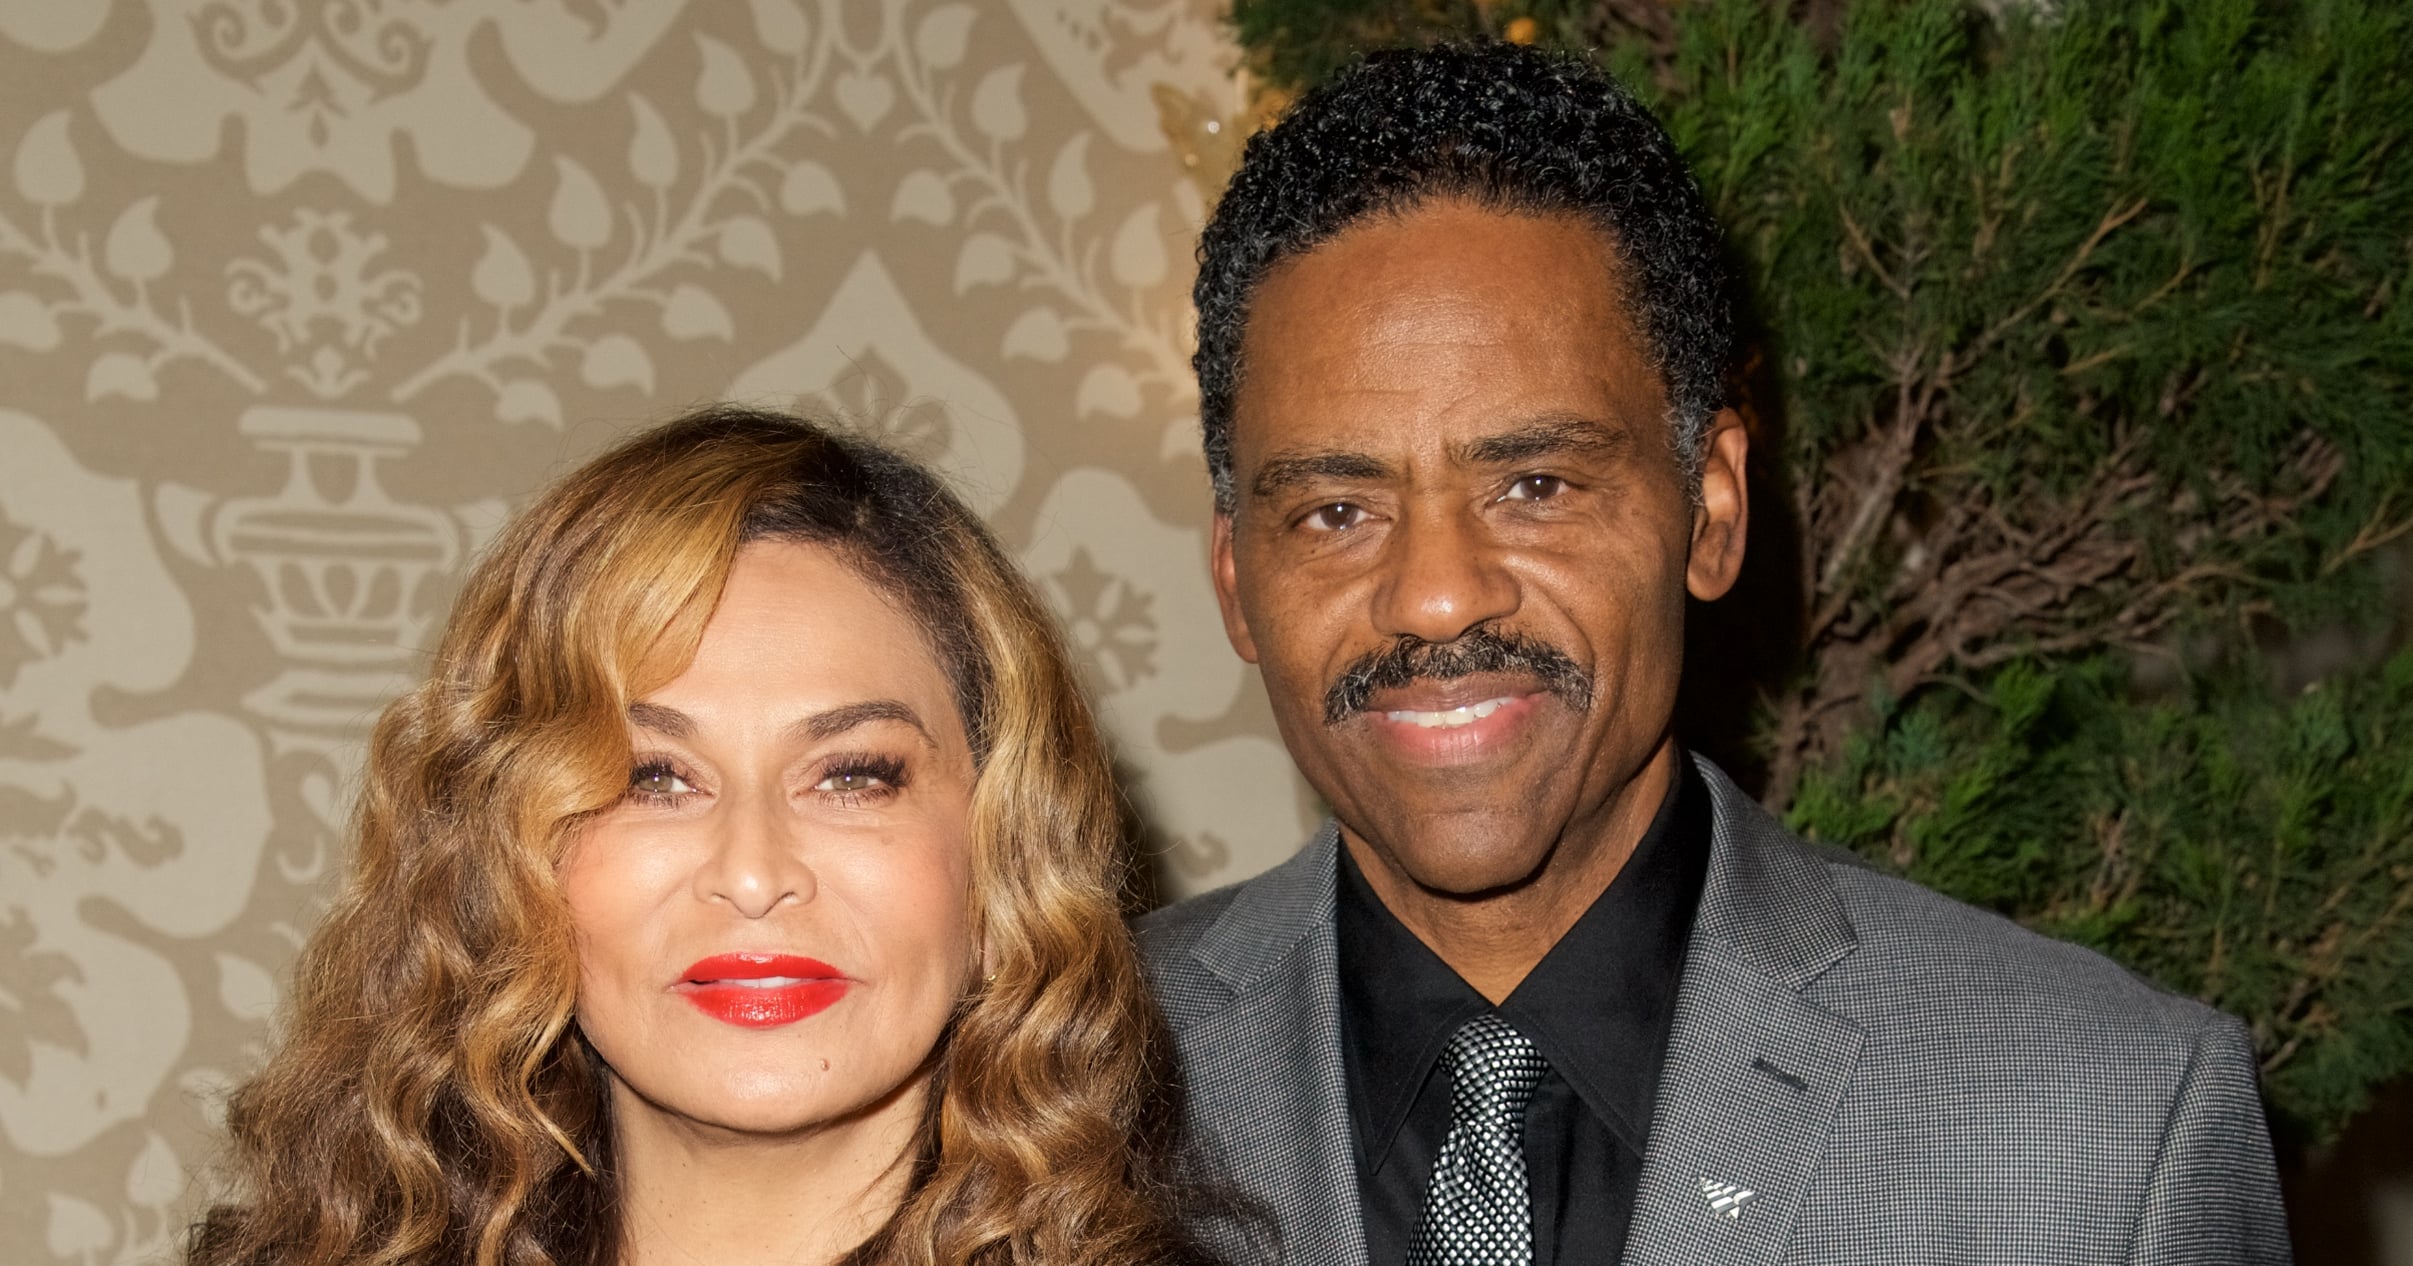 Tina Knowles-Lawson and Richard Lawson Reportedly Divorcing After 8 Years of Marriage